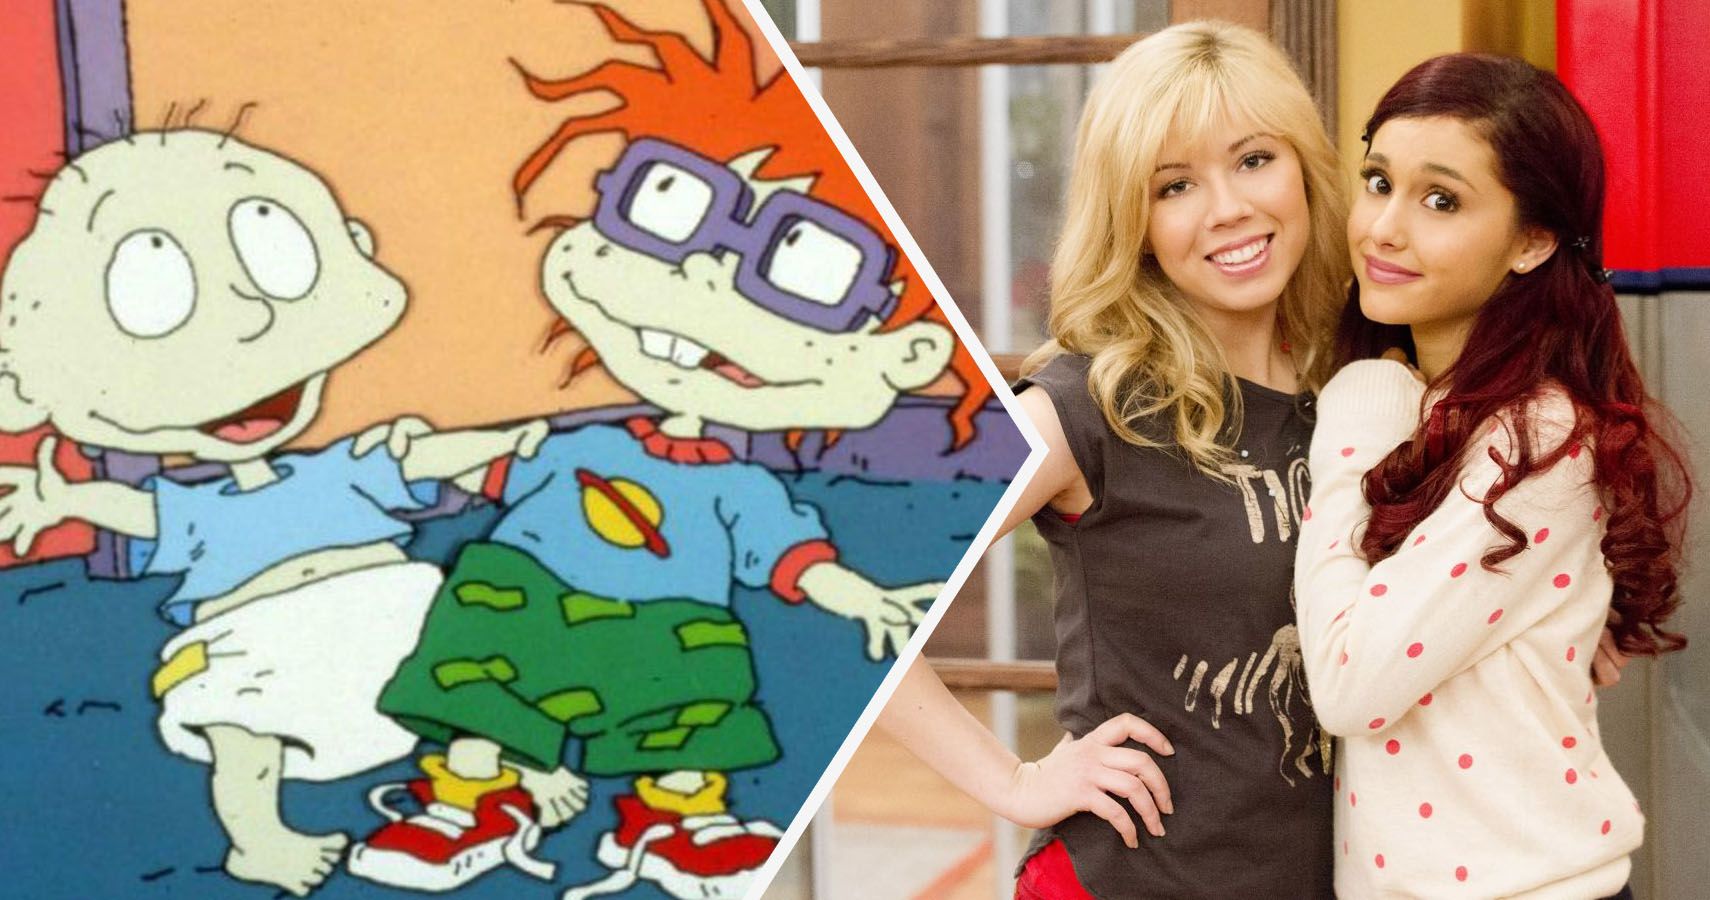 15 Top TV Shows From Nickelodeon, Officially Ranked